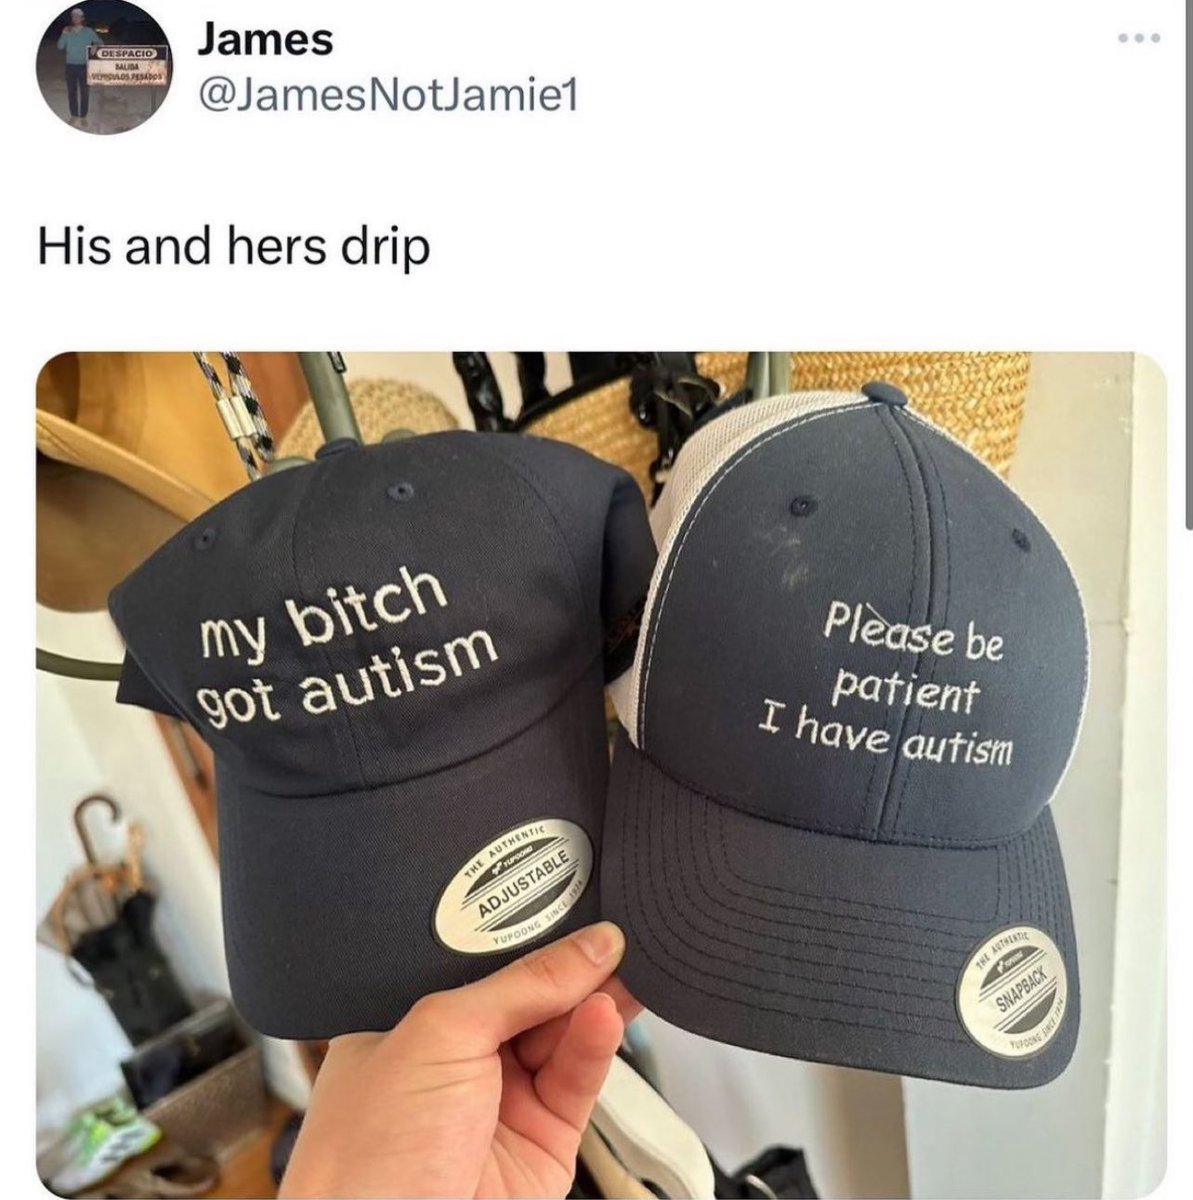 @kelspluscoffee My husband sent me this one

If he buys me a hat with text in Comic Sans on it, I will cry